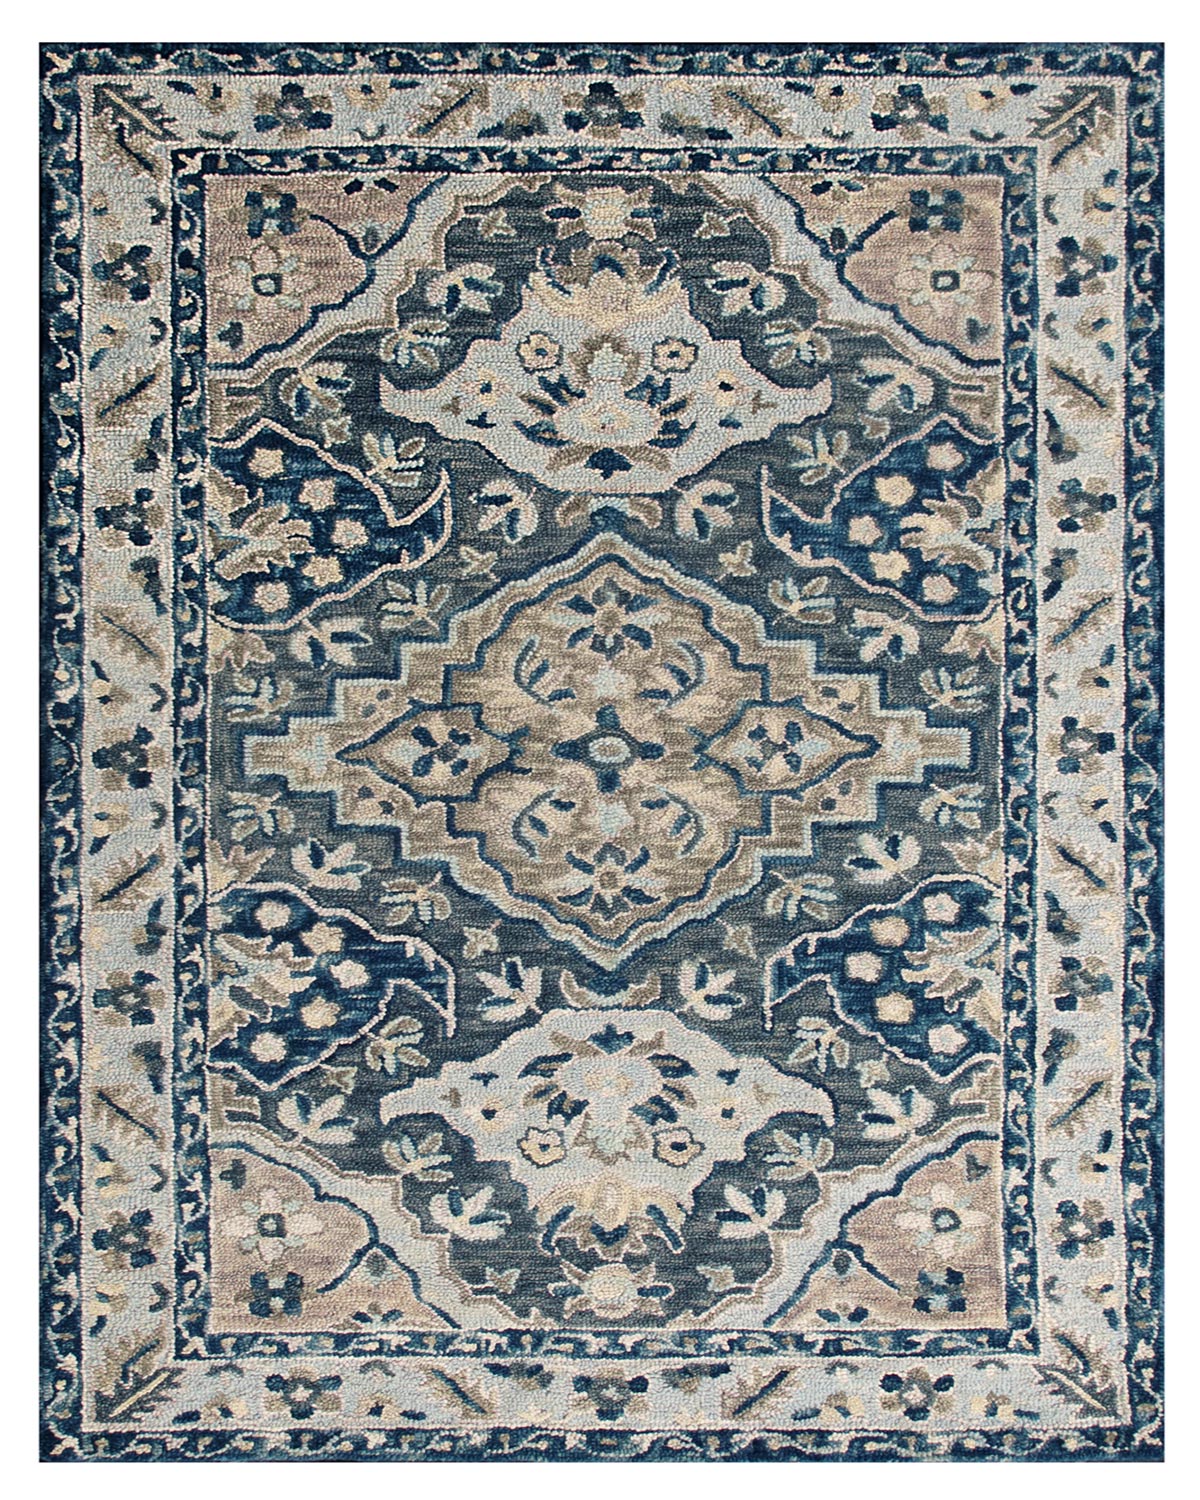 Hand-tufted Traditional Rug (INA-1010)